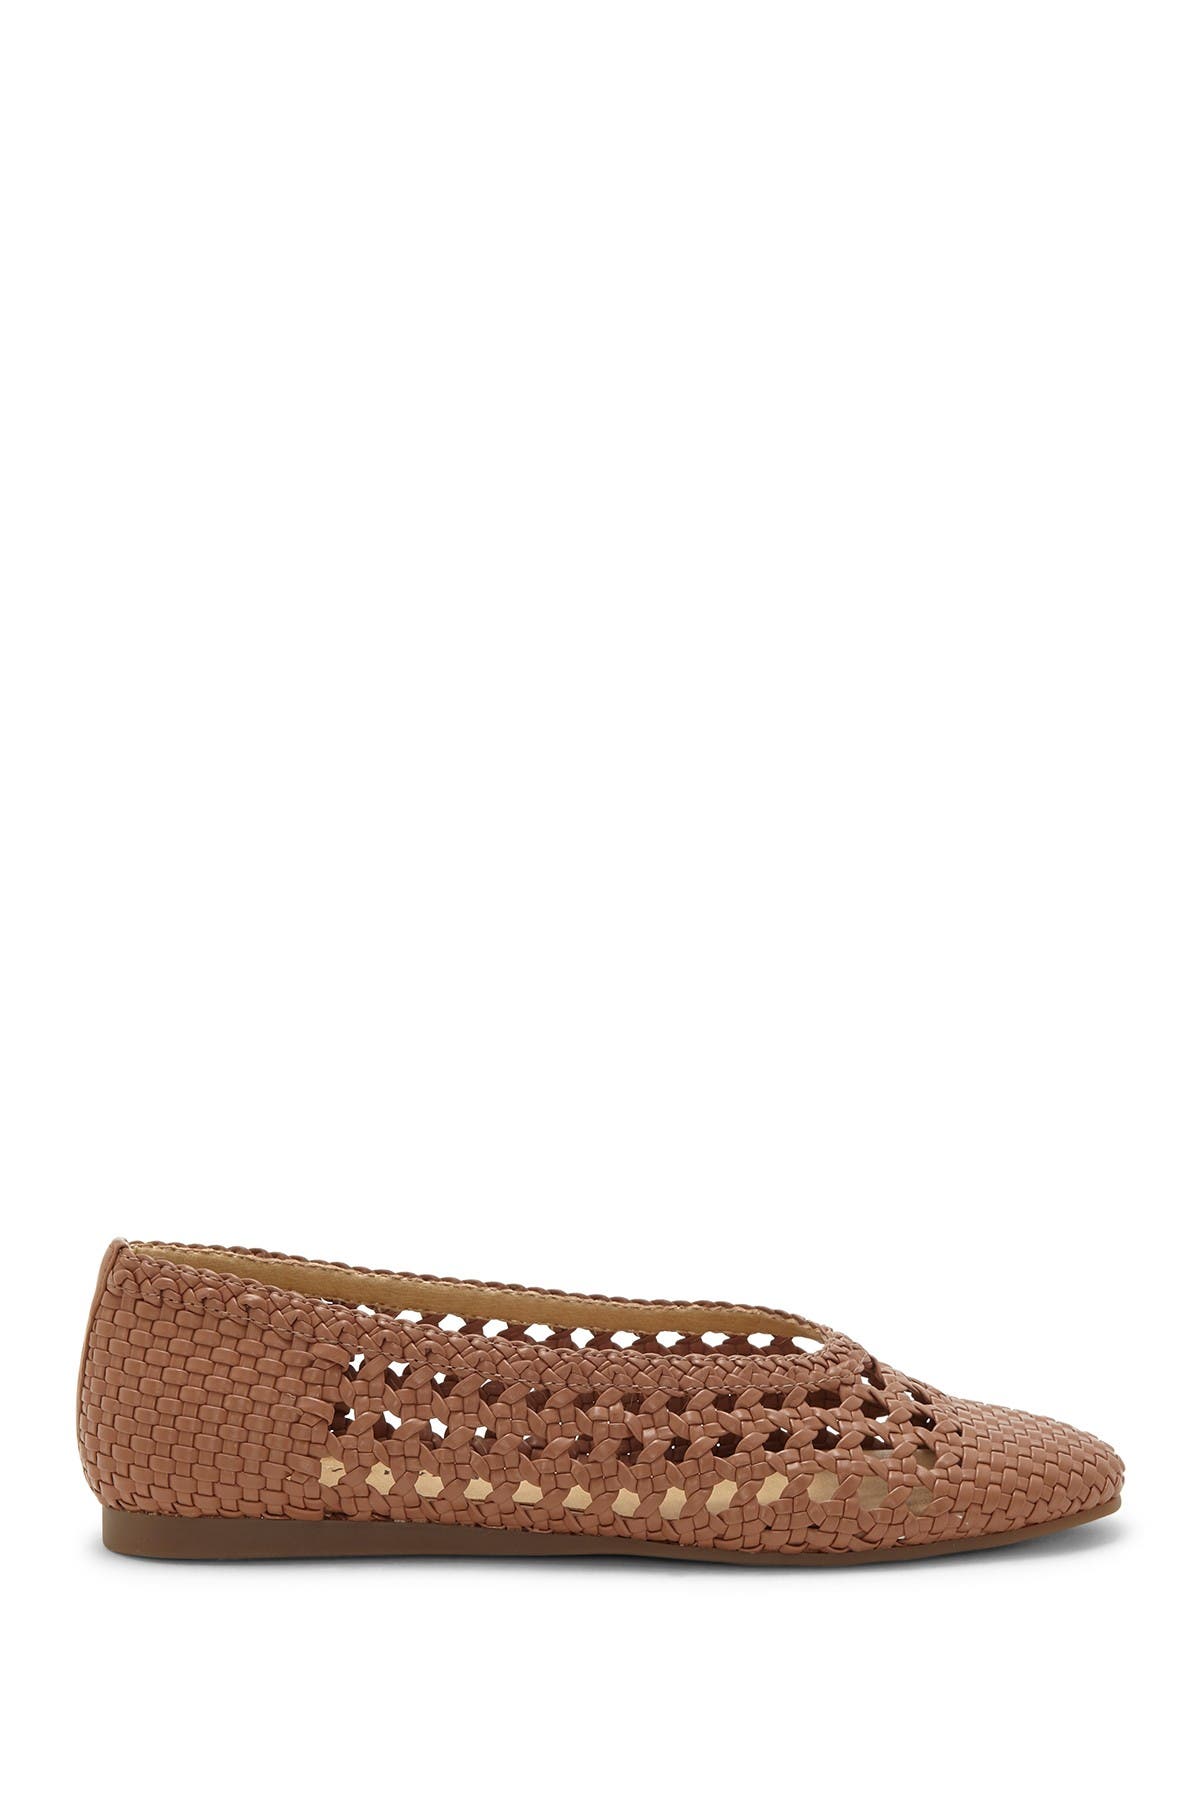 Lucky Brand | Chalenti Leather Woven Flat | Nordstrom Rack